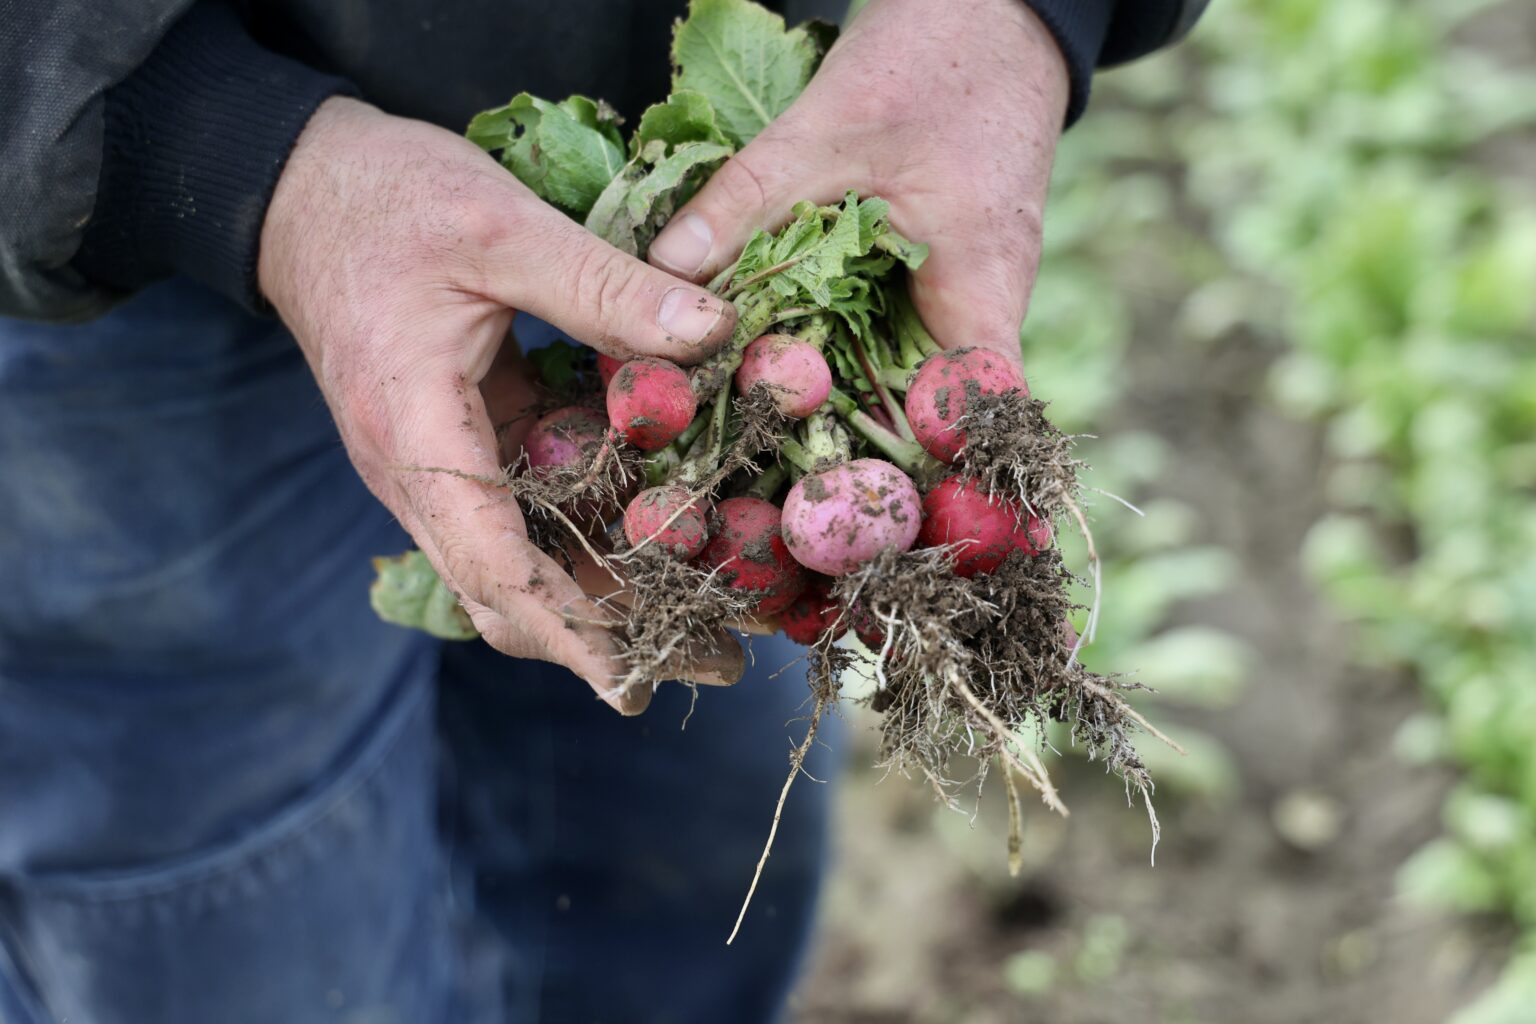 Skuter Fontaine of Everson's Terra Verde Farm holds Easter egg radishes that can't be sold because of floodwater contamination. Flood aid for small Whatcom farms has proven elusive.